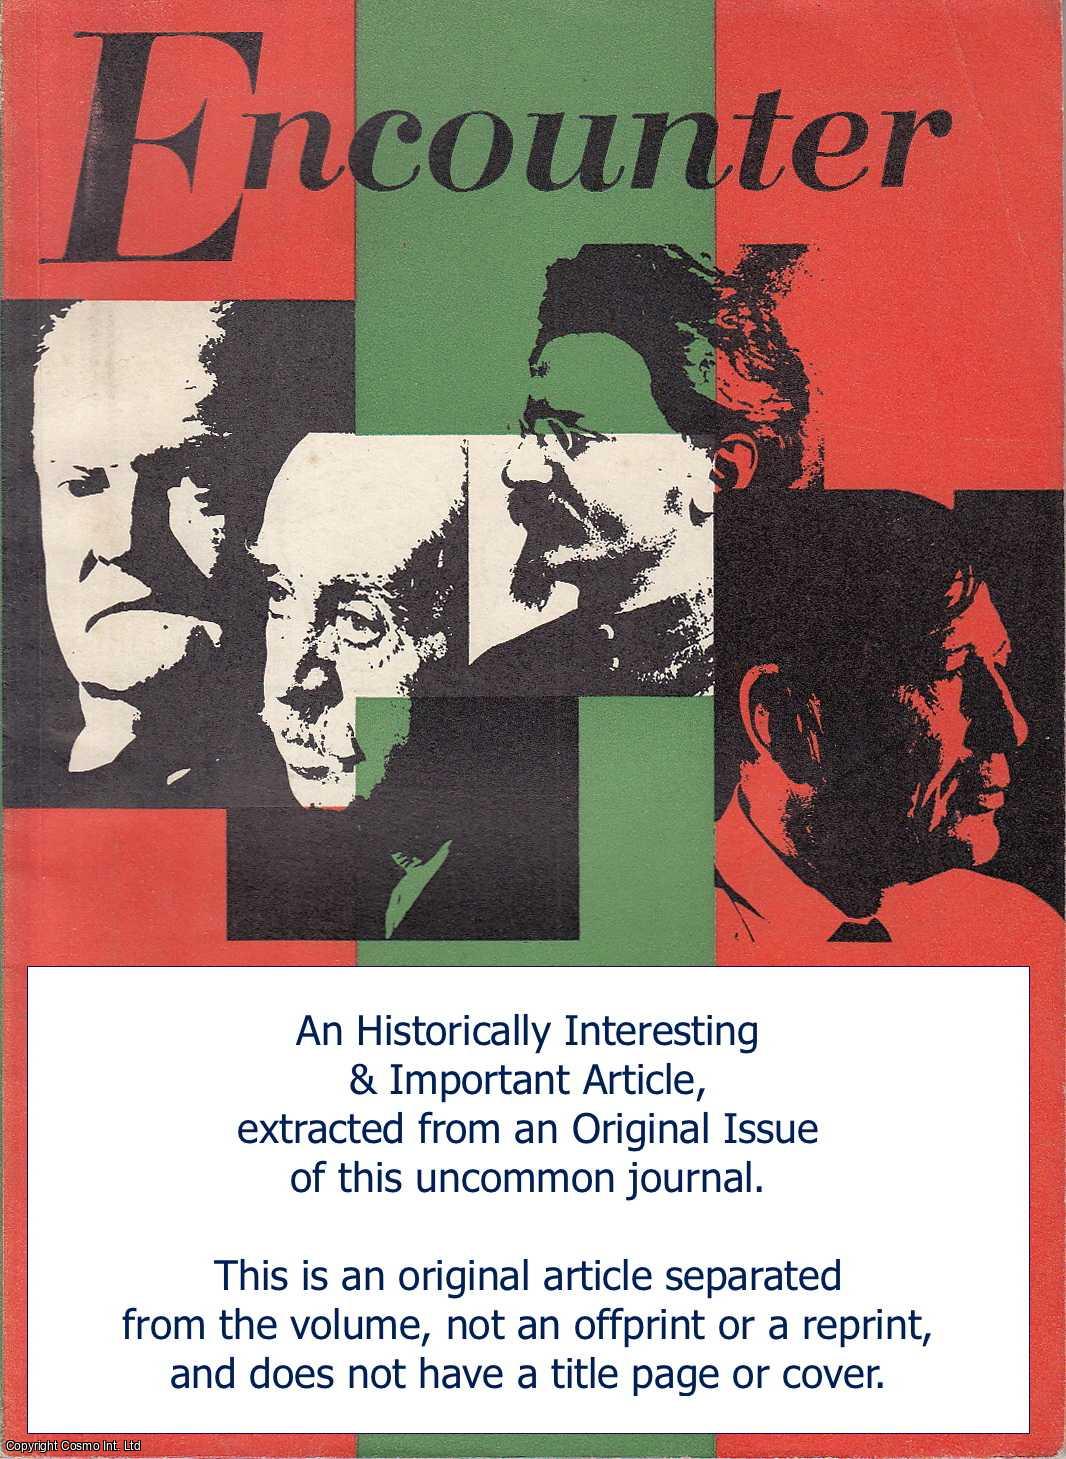 Frank Hilton - Britain's New Class. An original article from Encounter, a monthly review of literature, the arts and politics, 1958.